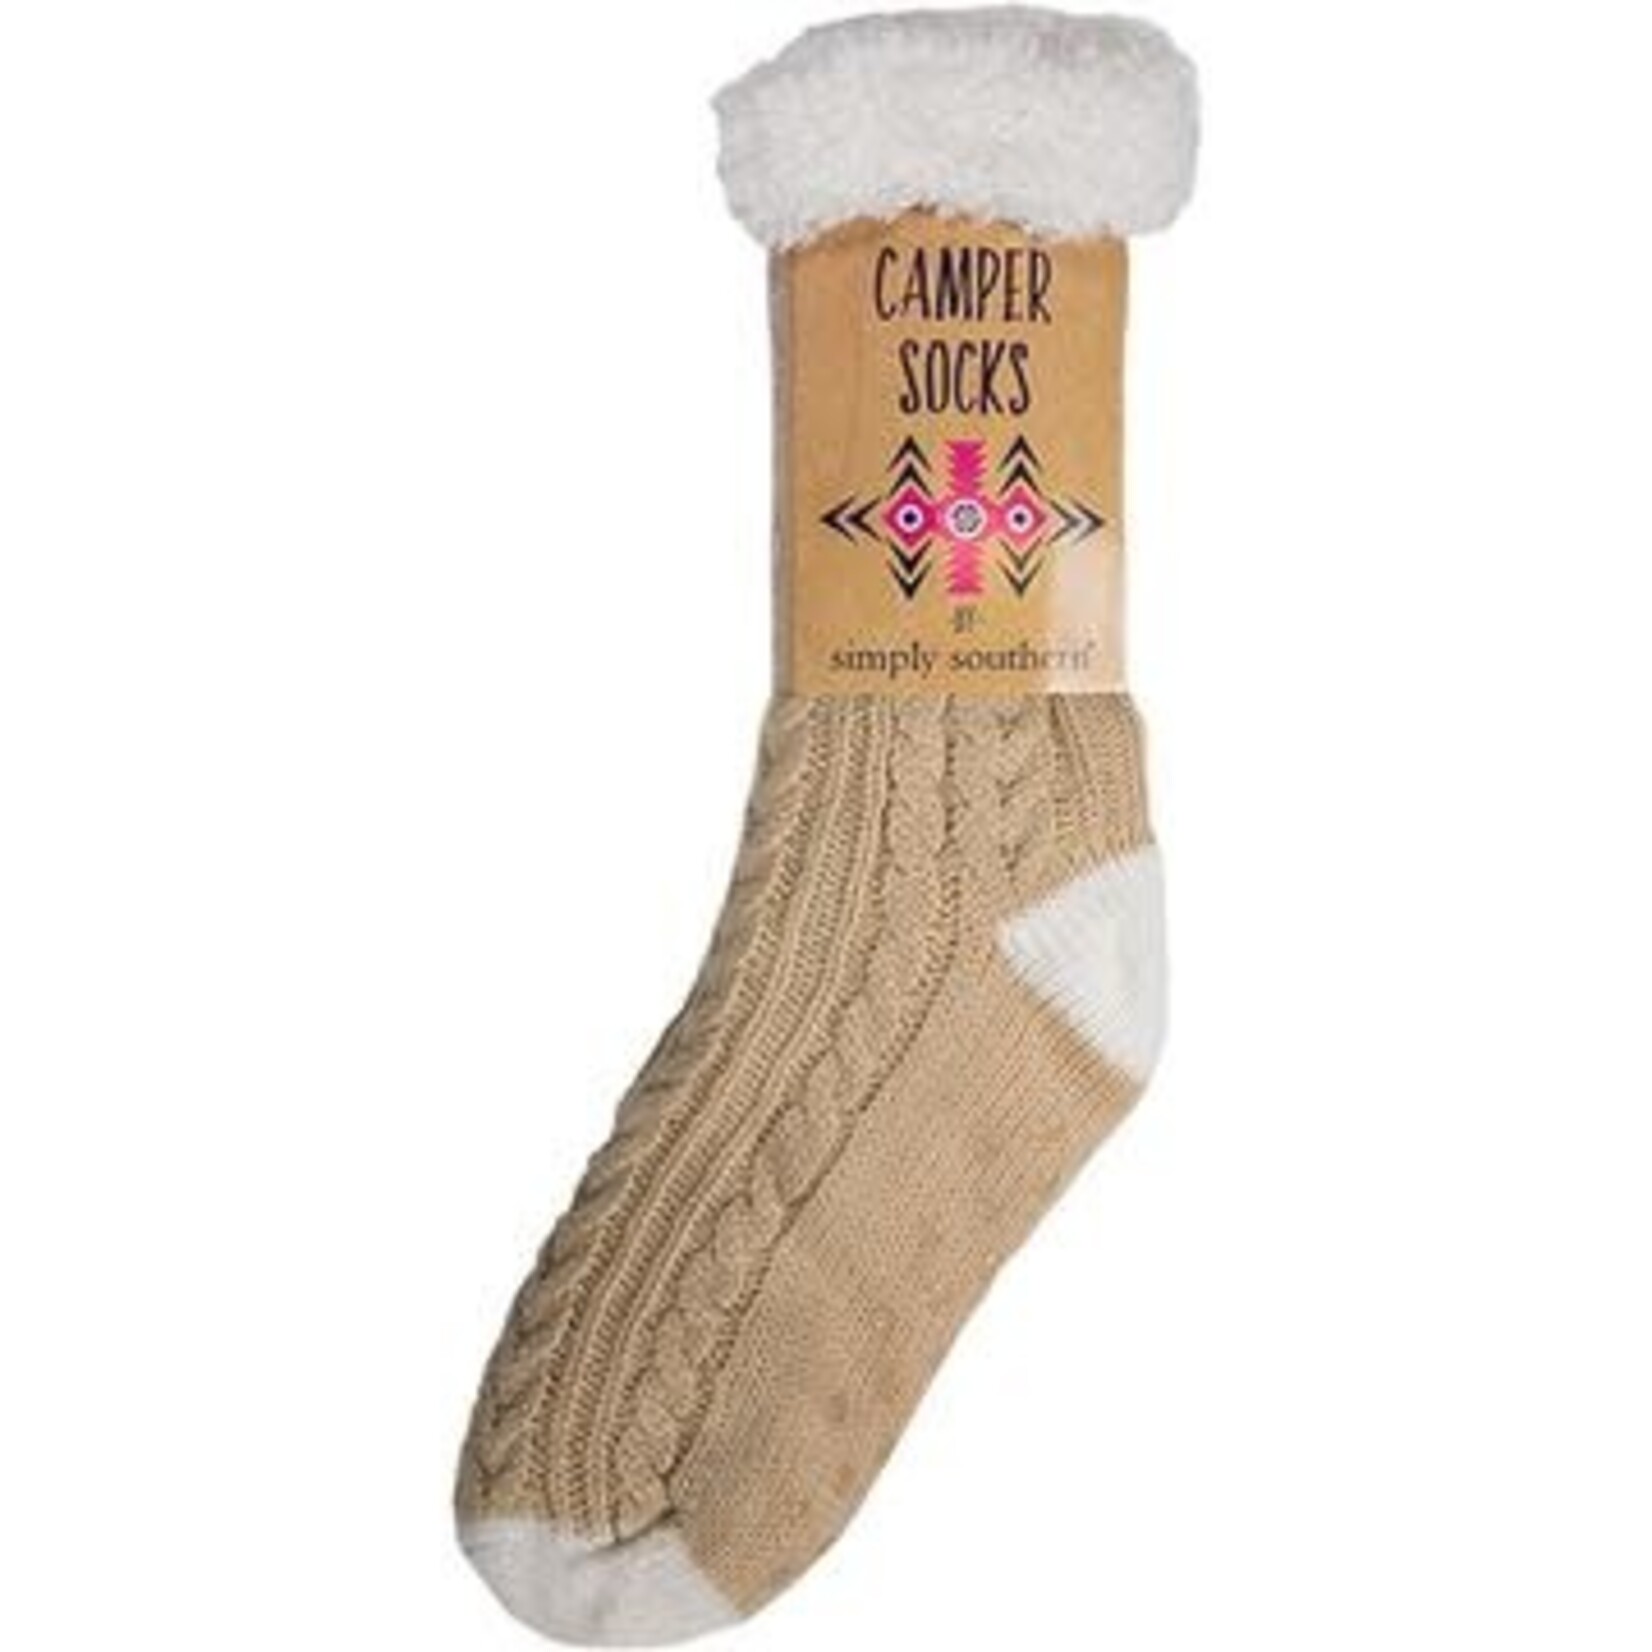 Simply Southern Simply Southern Camper Socks Solid